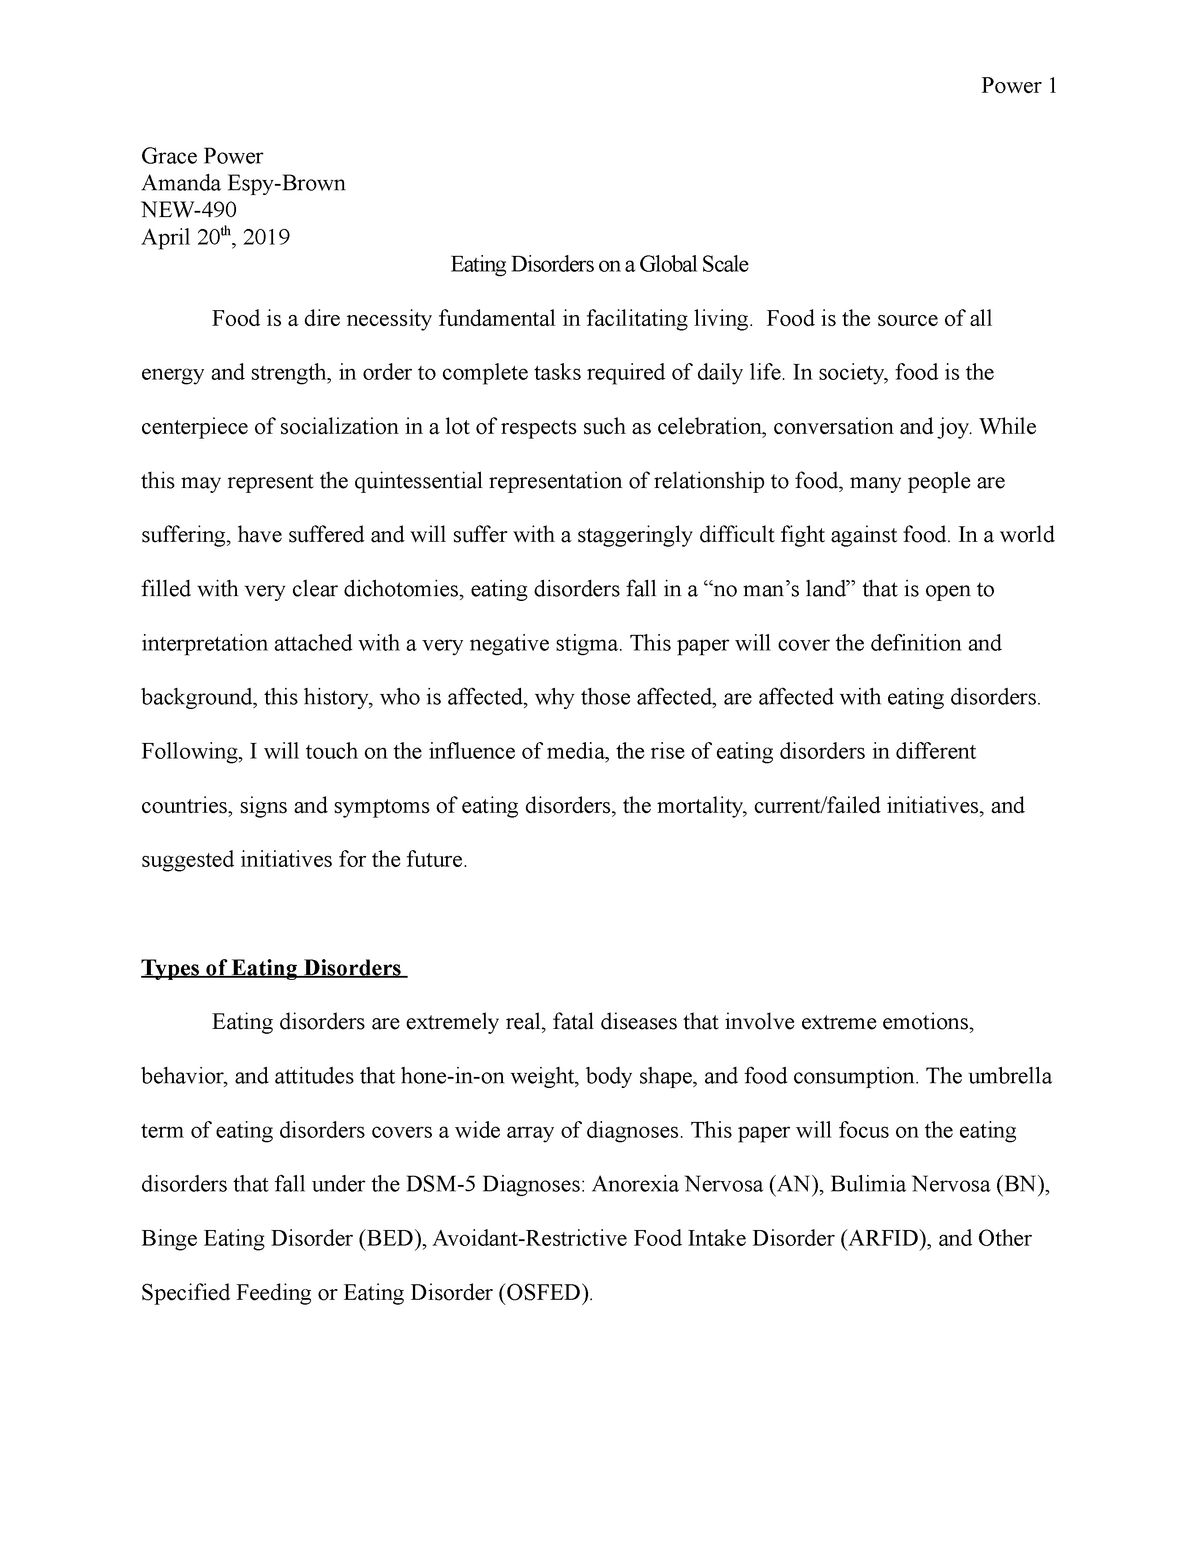 eating disorders essay introduction